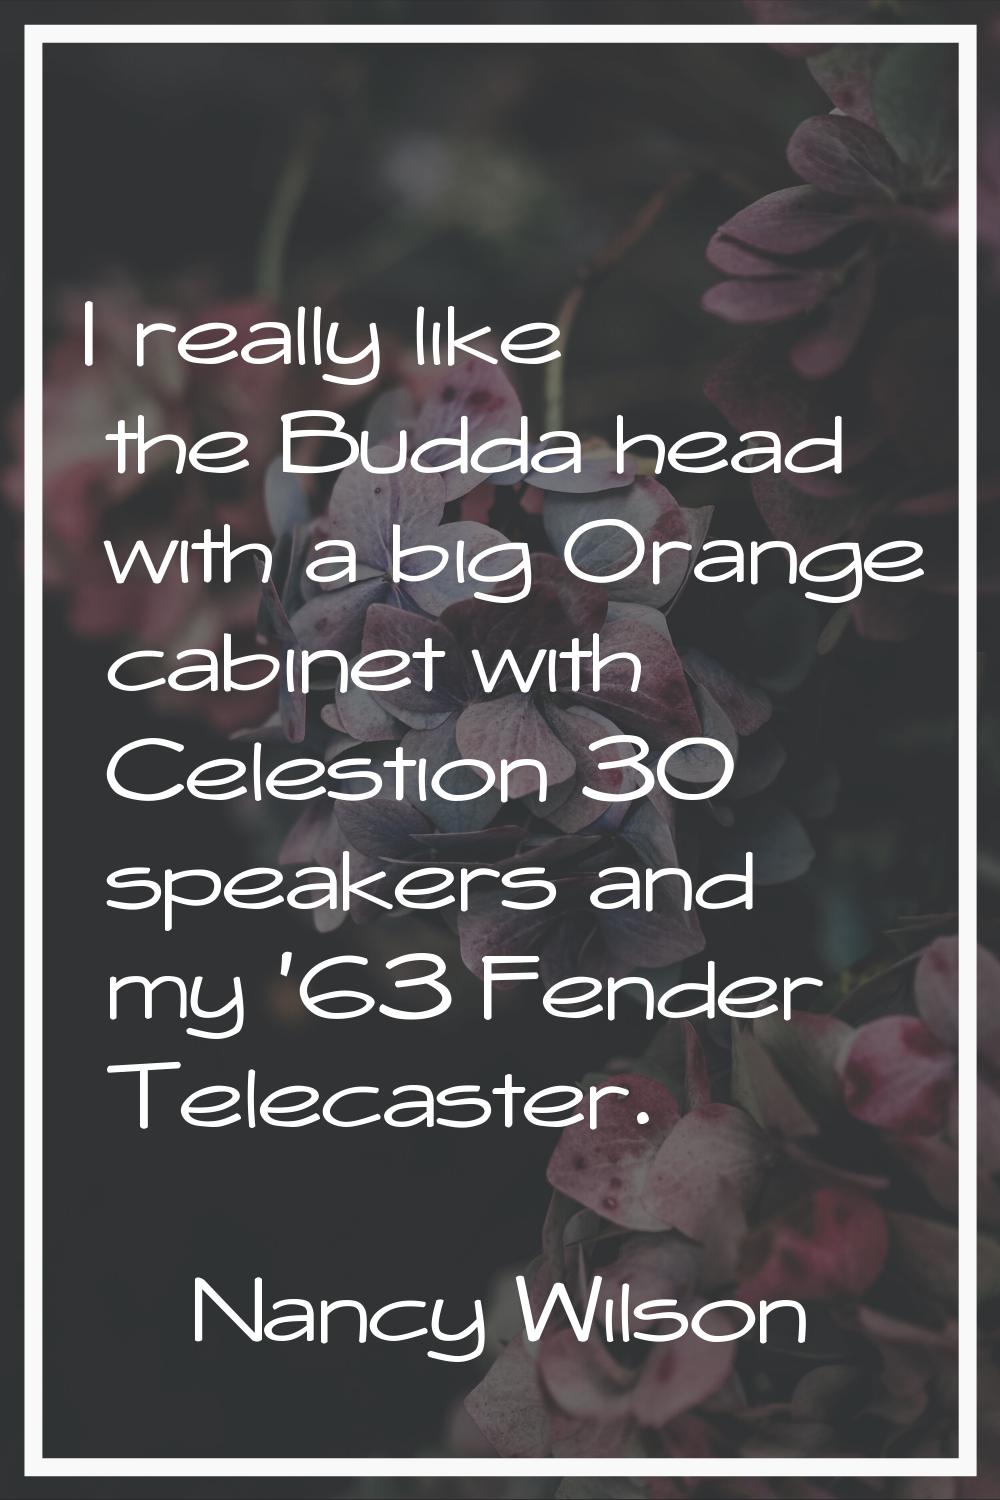 I really like the Budda head with a big Orange cabinet with Celestion 30 speakers and my '63 Fender